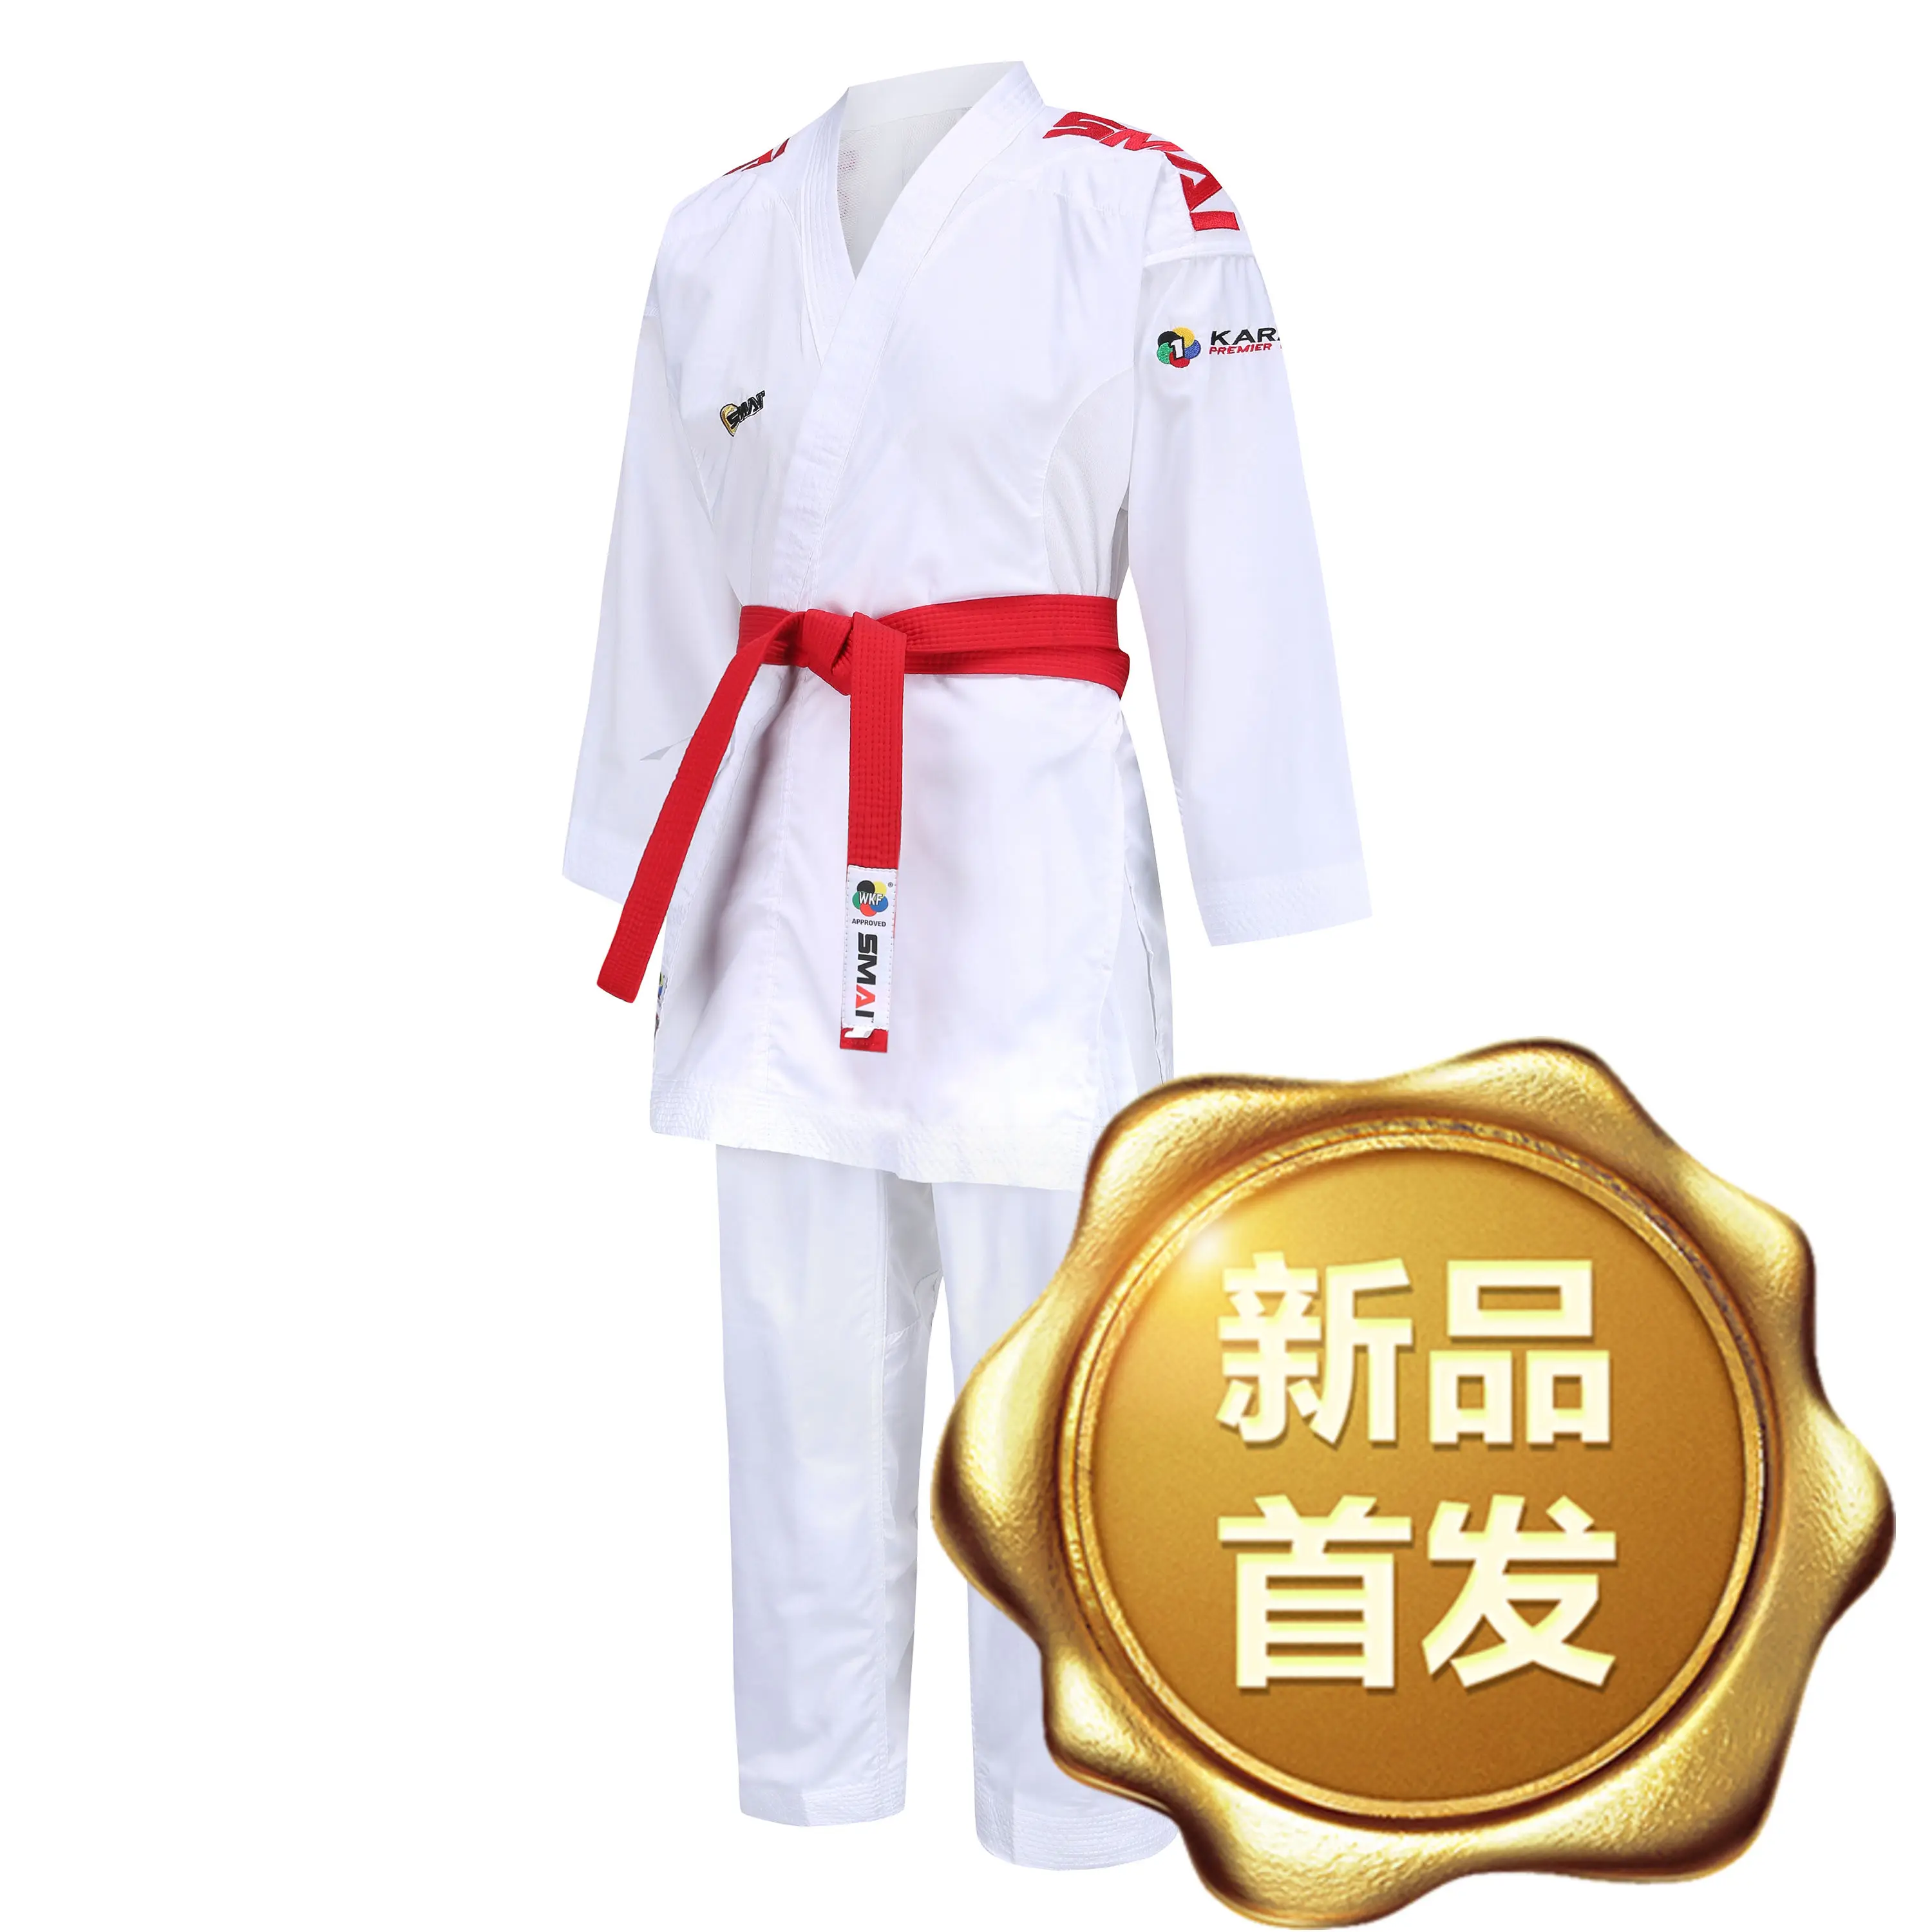 Official designation Karate GI SMAI Kumite WKF Approved kumite Master K1 premier league karate GI uniforms used for competitions